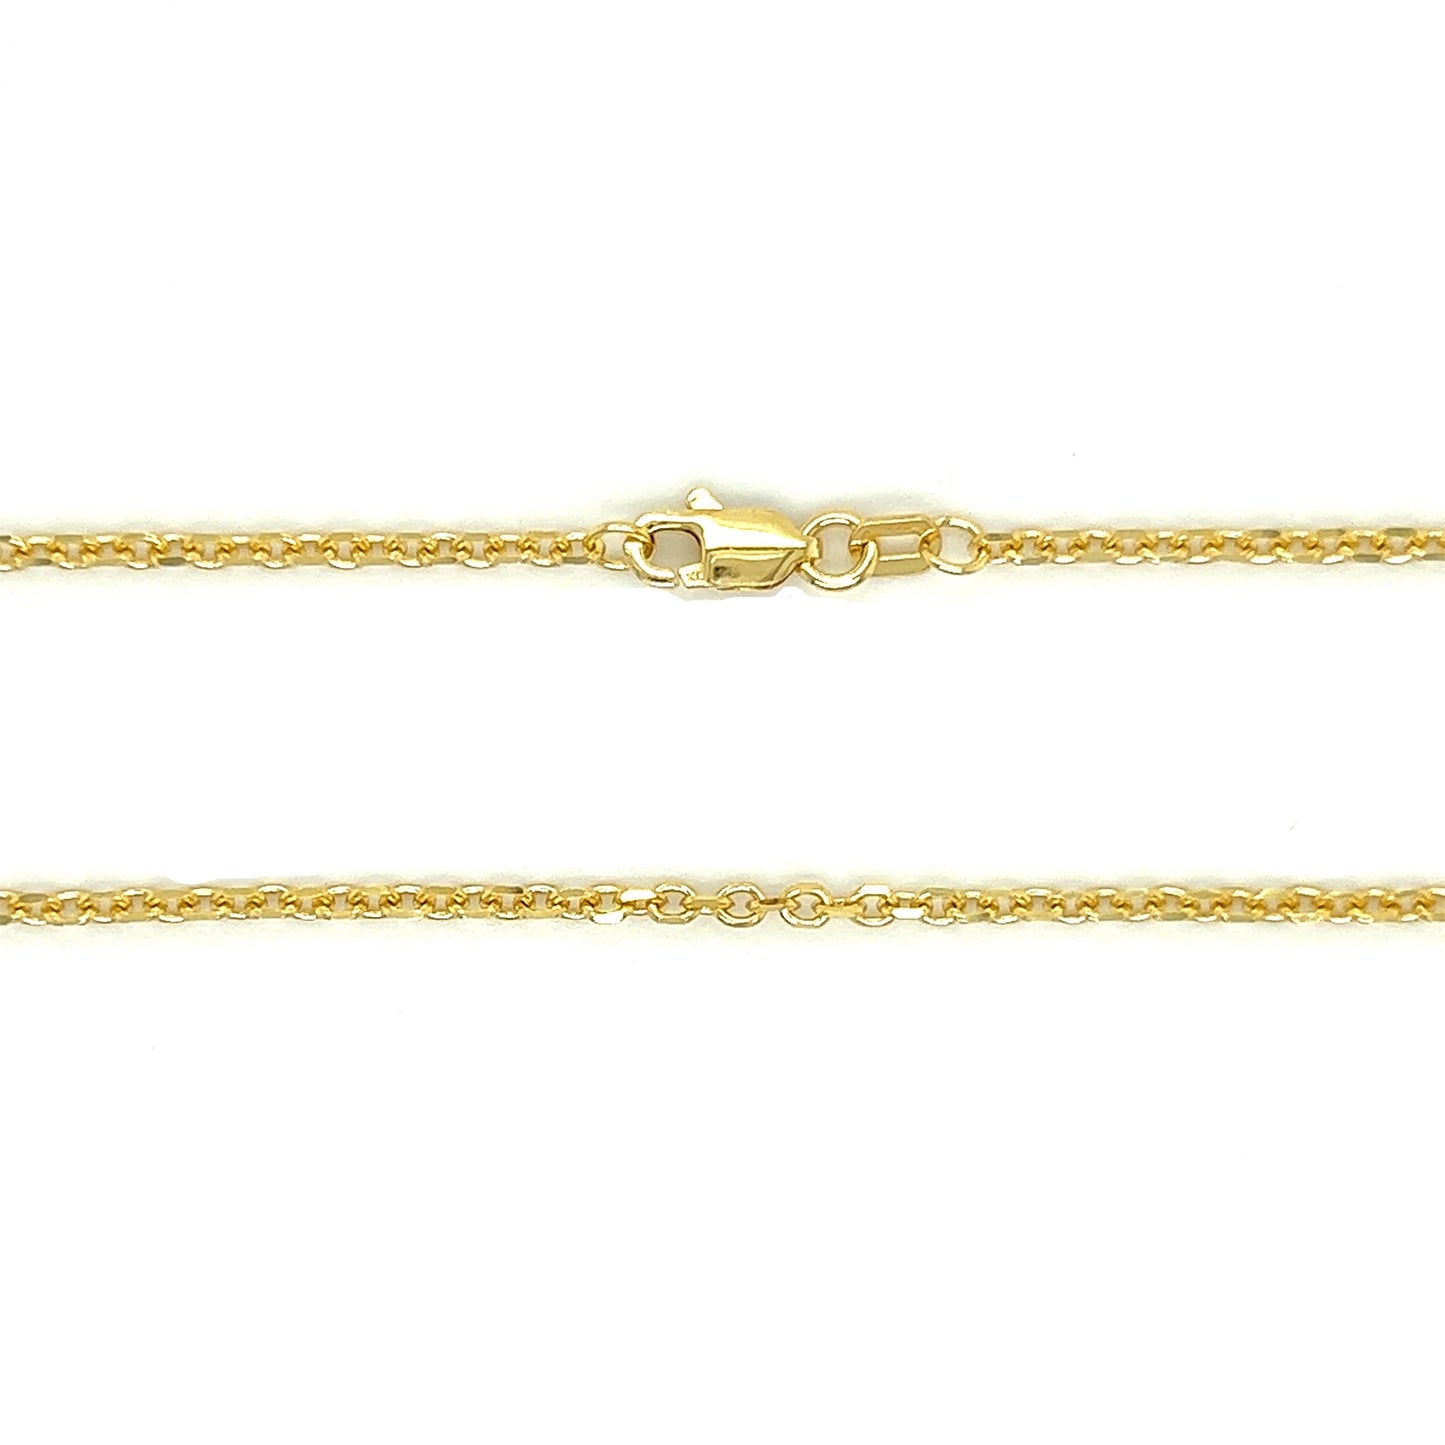 Cable Chain 1.8mm in 14K Yellow Gold Chain and Clasp View